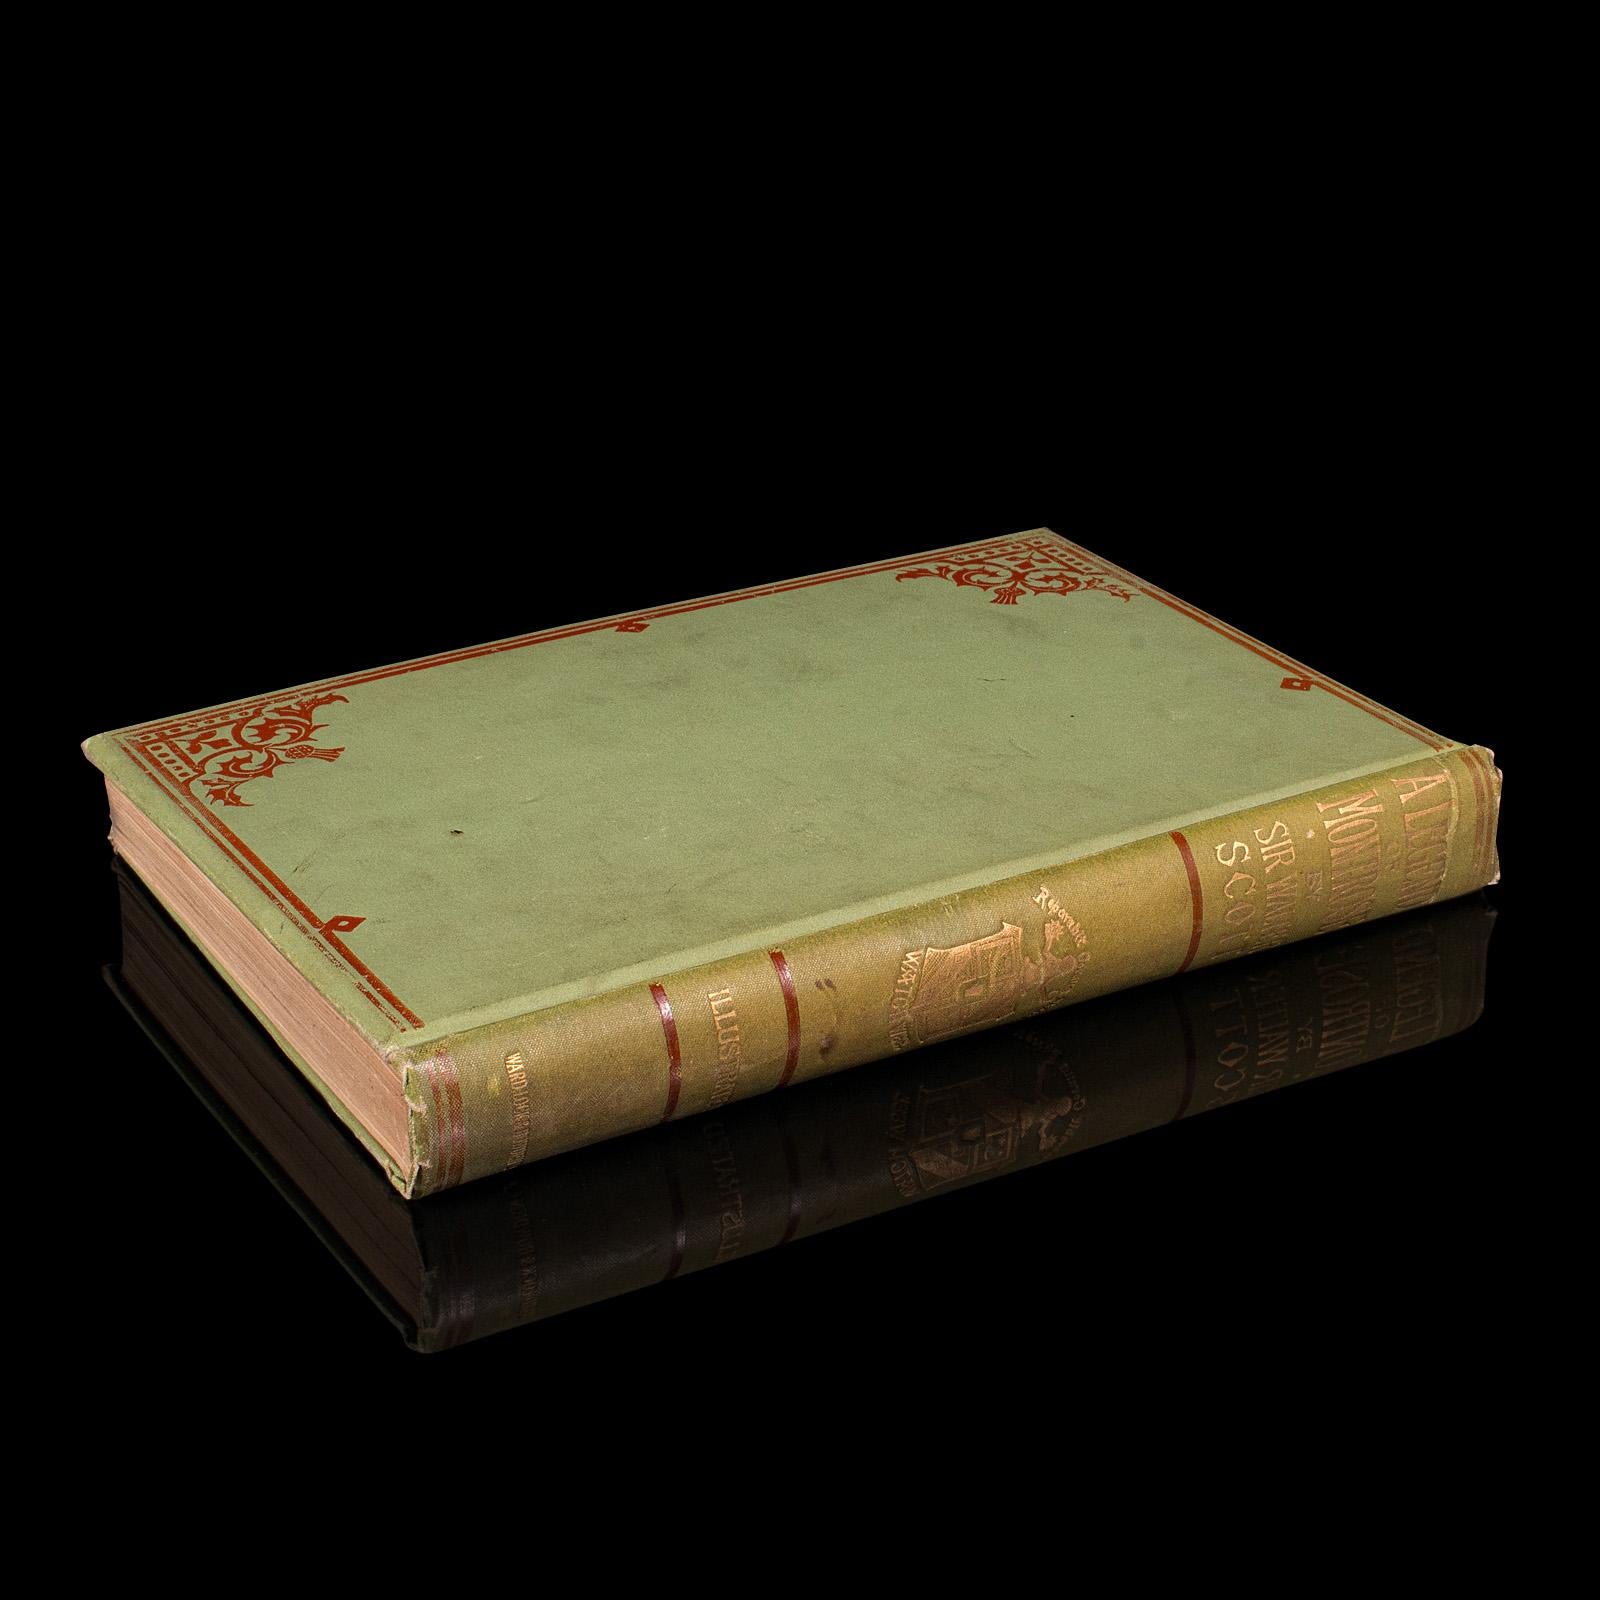 
This is an antique novel, A Legend of Montrose by Sir Walter Scott. An English, bound book of Scottish interest, dating to the Victorian period, published 1896.

A prominent Scottish author, Sir Walter Scott (1771 - 1832) is well known for the